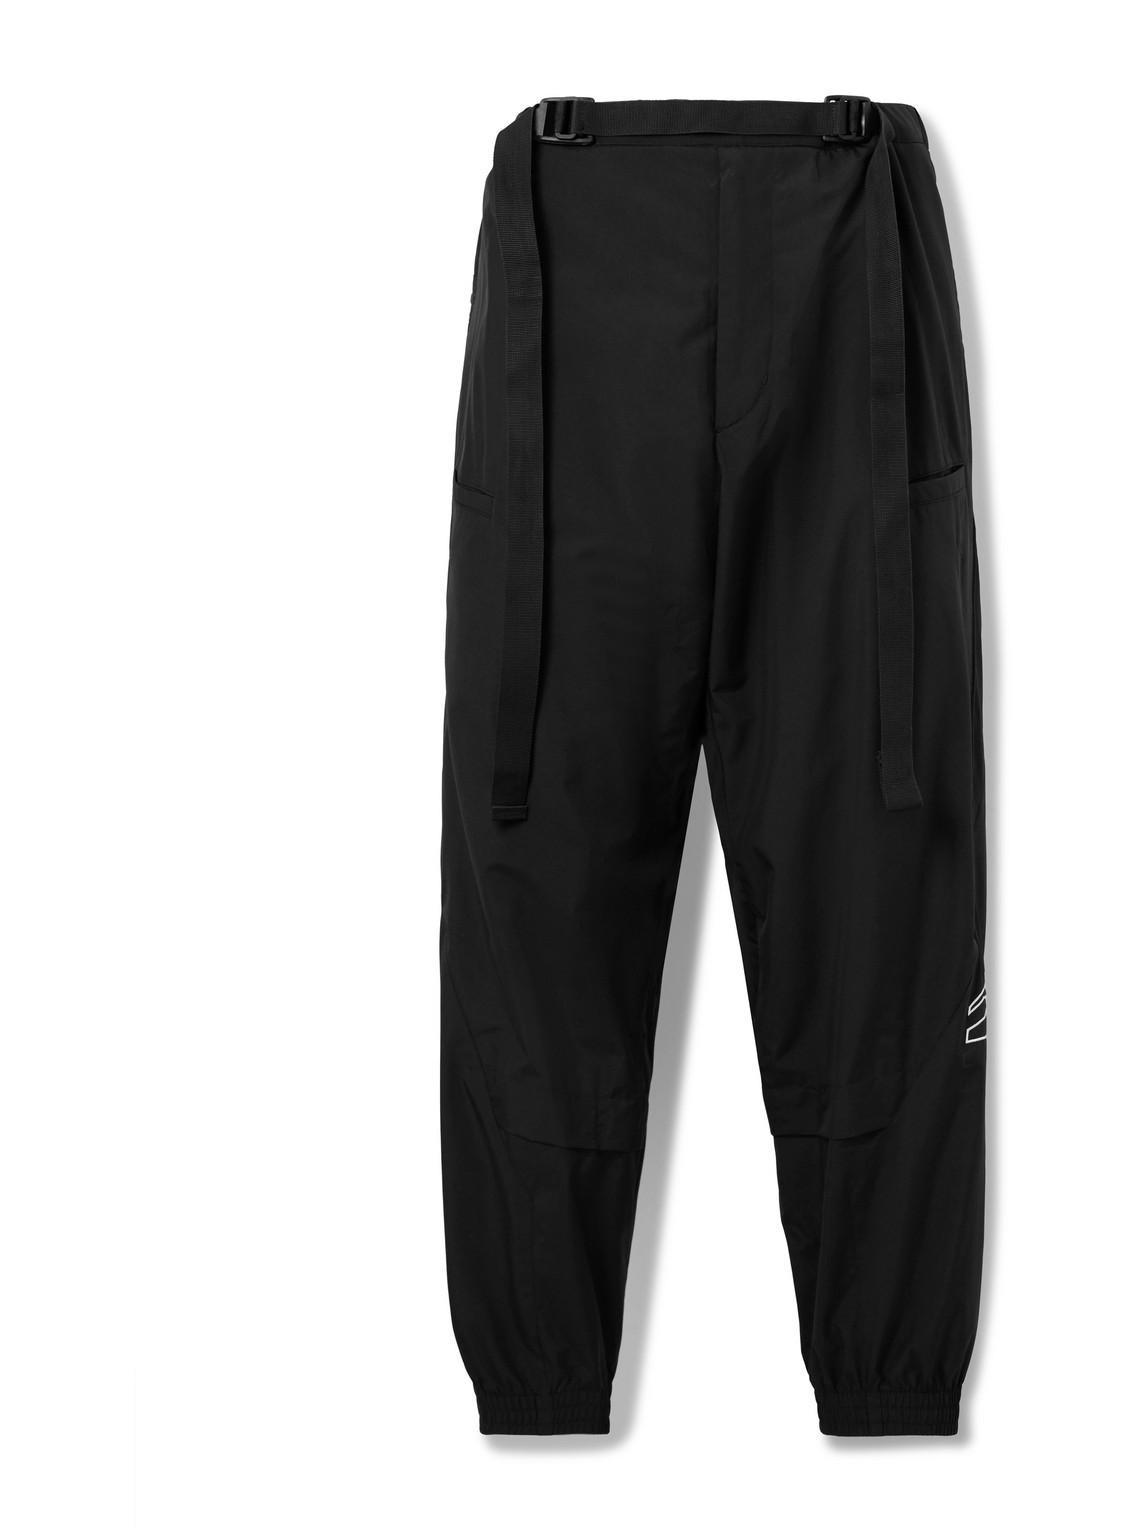 Tapered 2L GORE-TEX INFINIUM™ WINDSTOPPER® Trousers